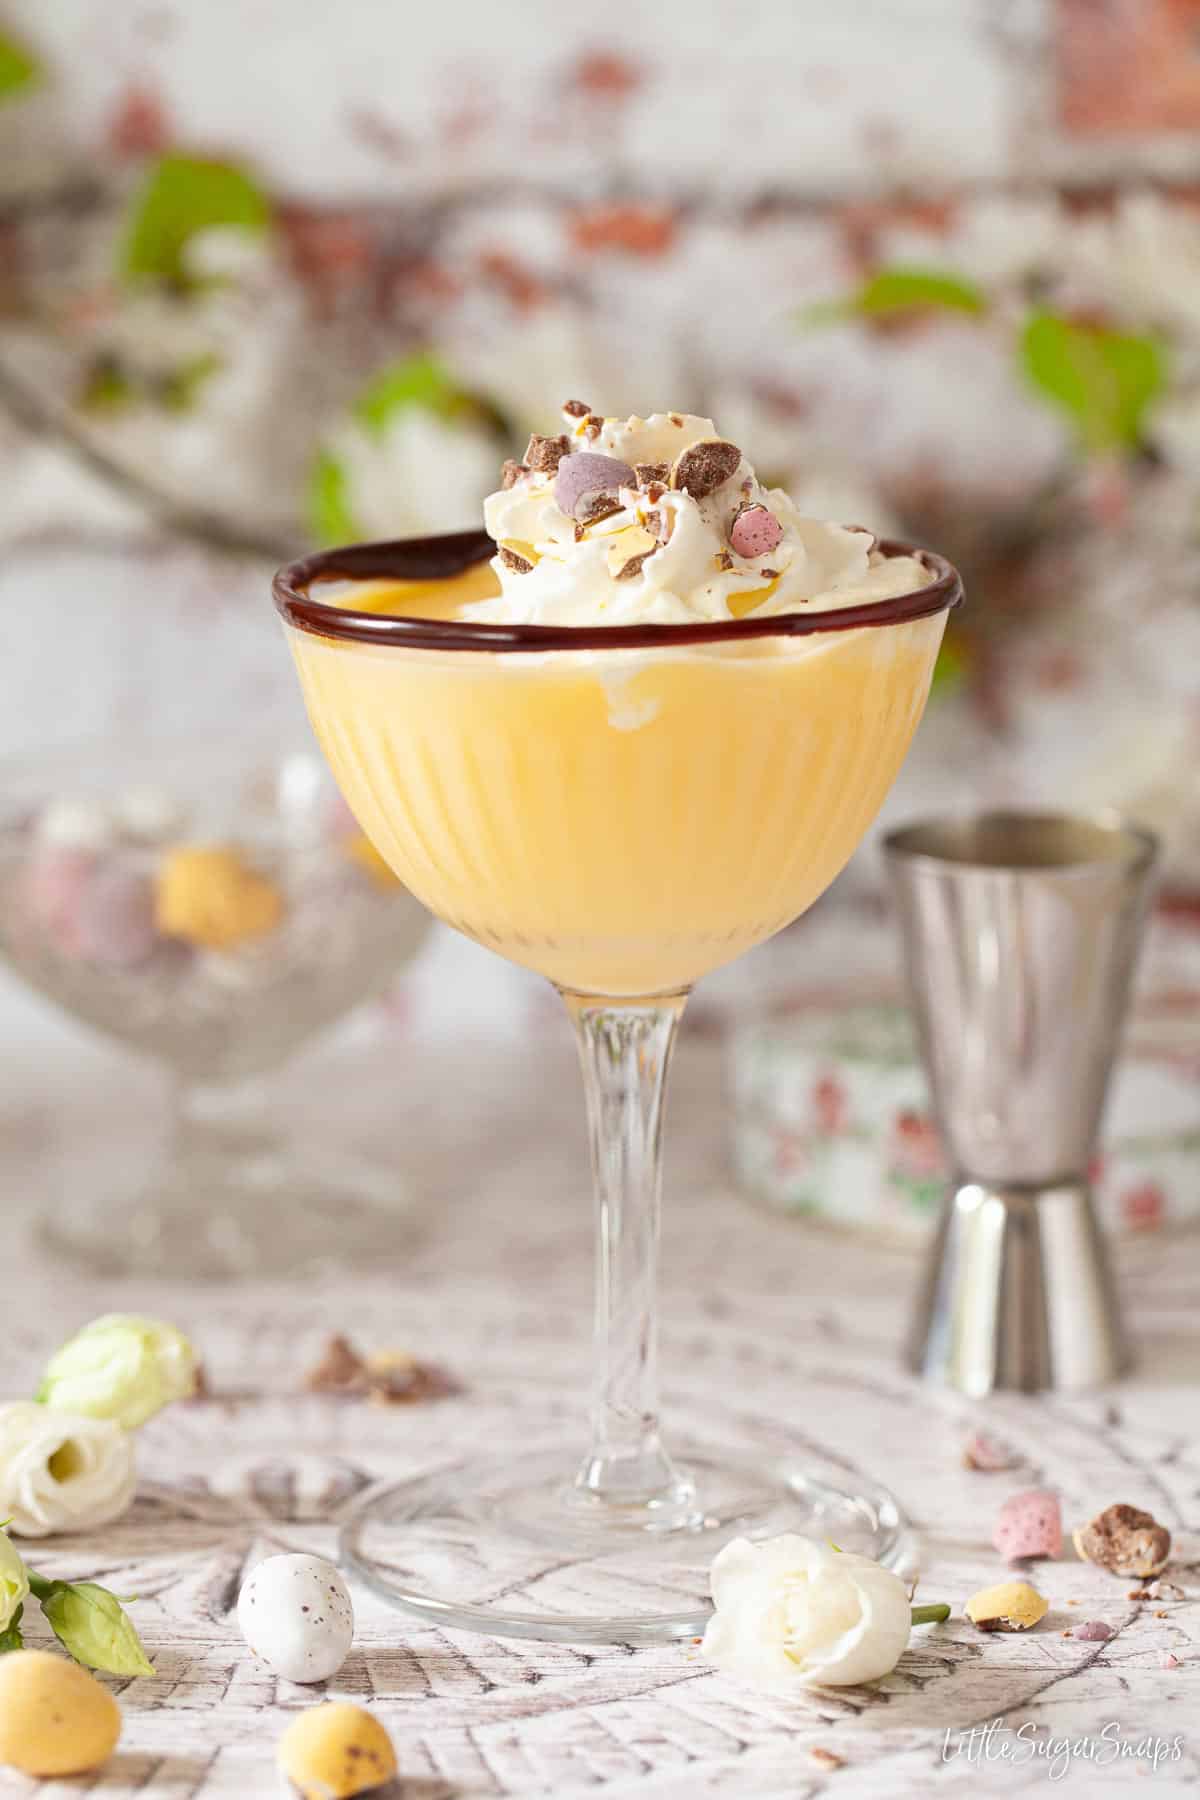 An advocaat Easter cocktail decorated with whipped cream and crushed candy eggs.